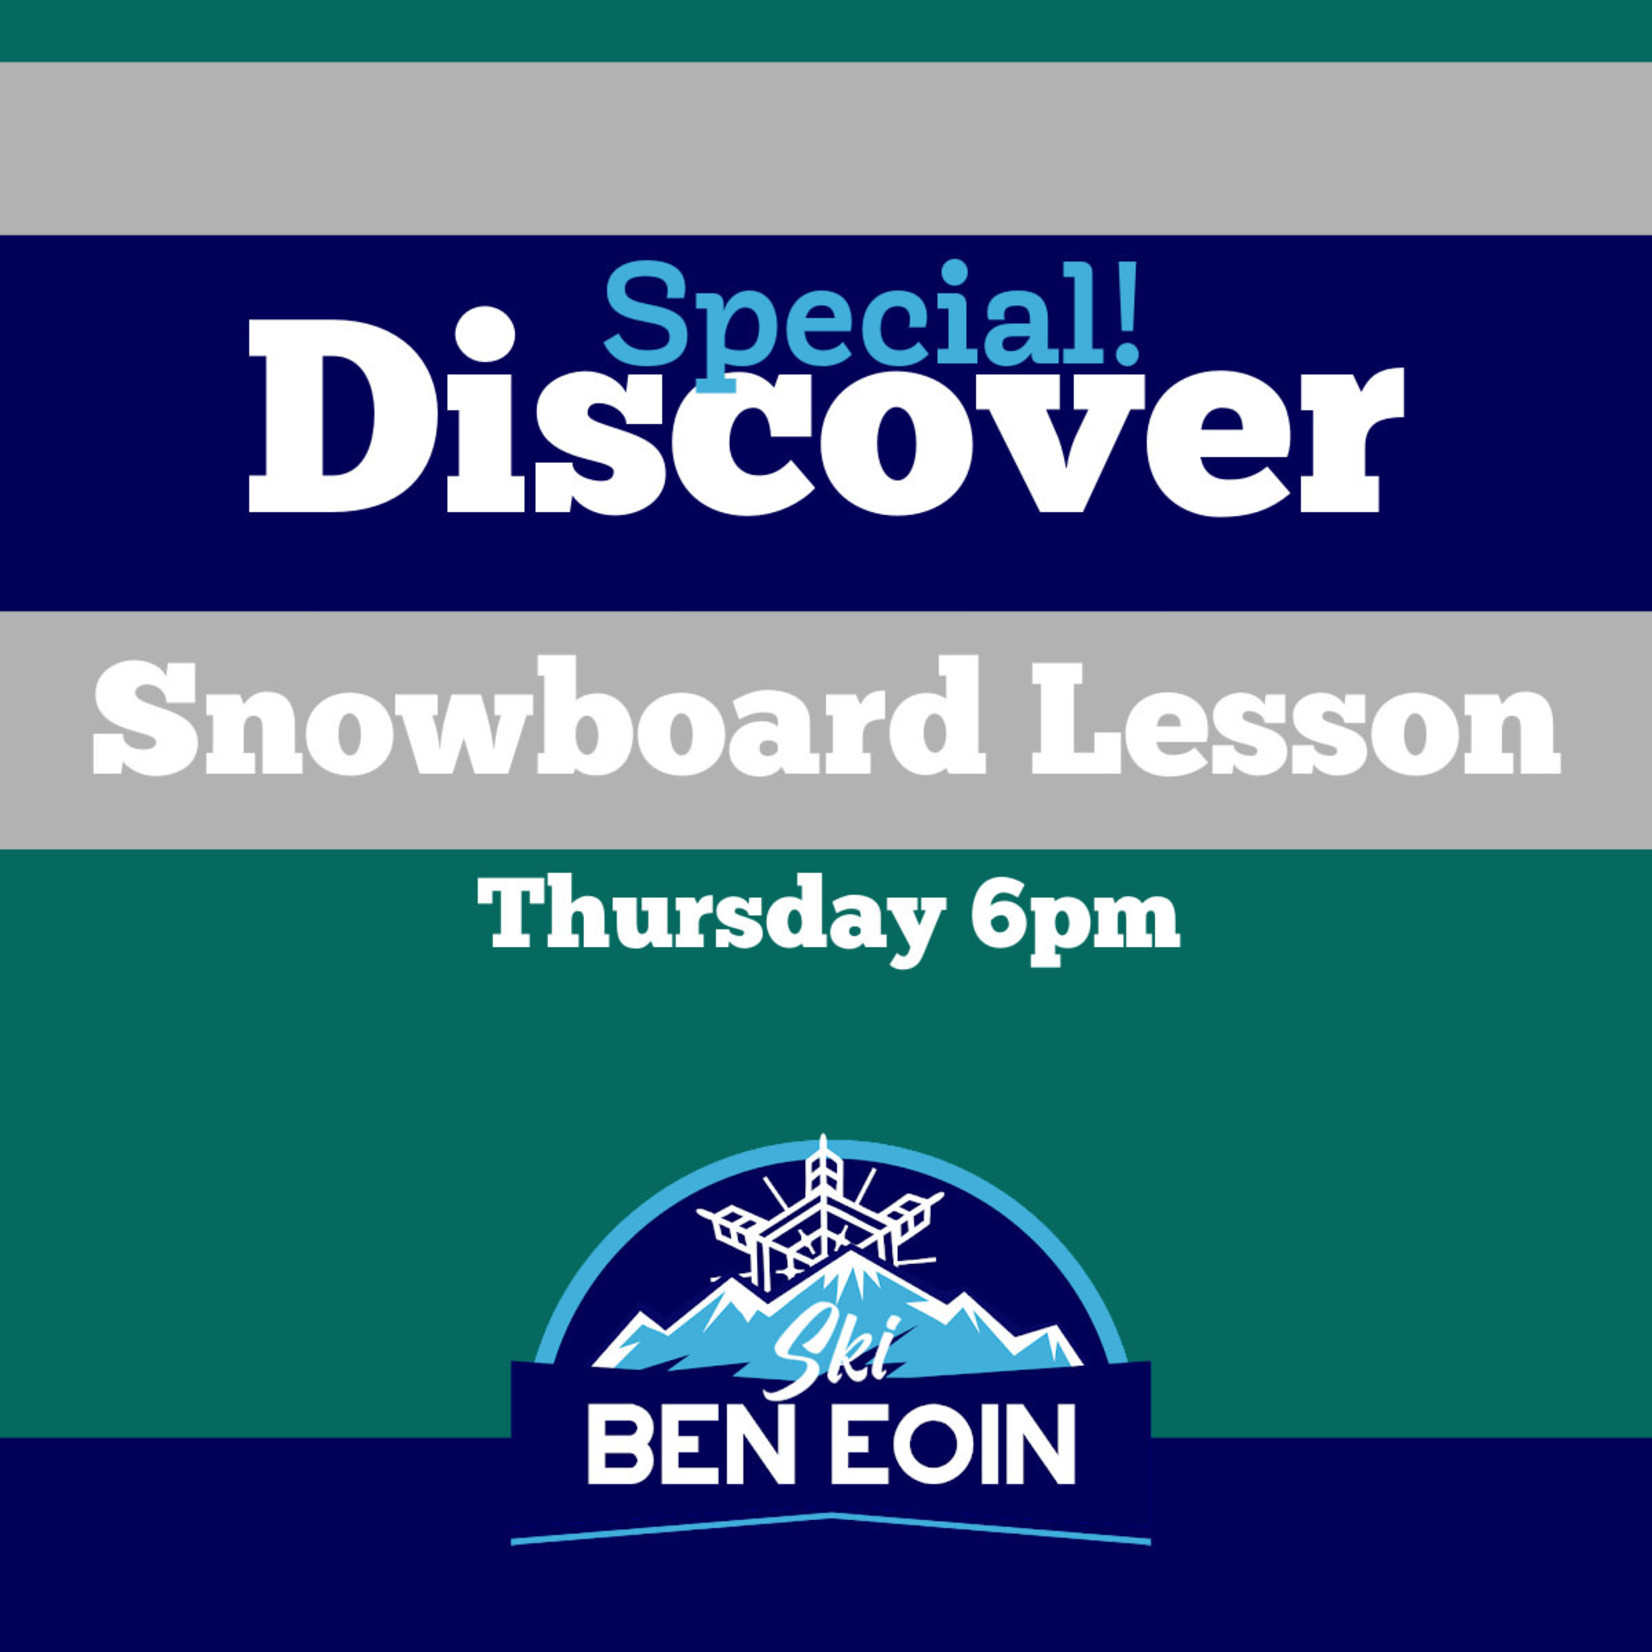 Discover SB Thursday 6pm *valid only for Feb 29th